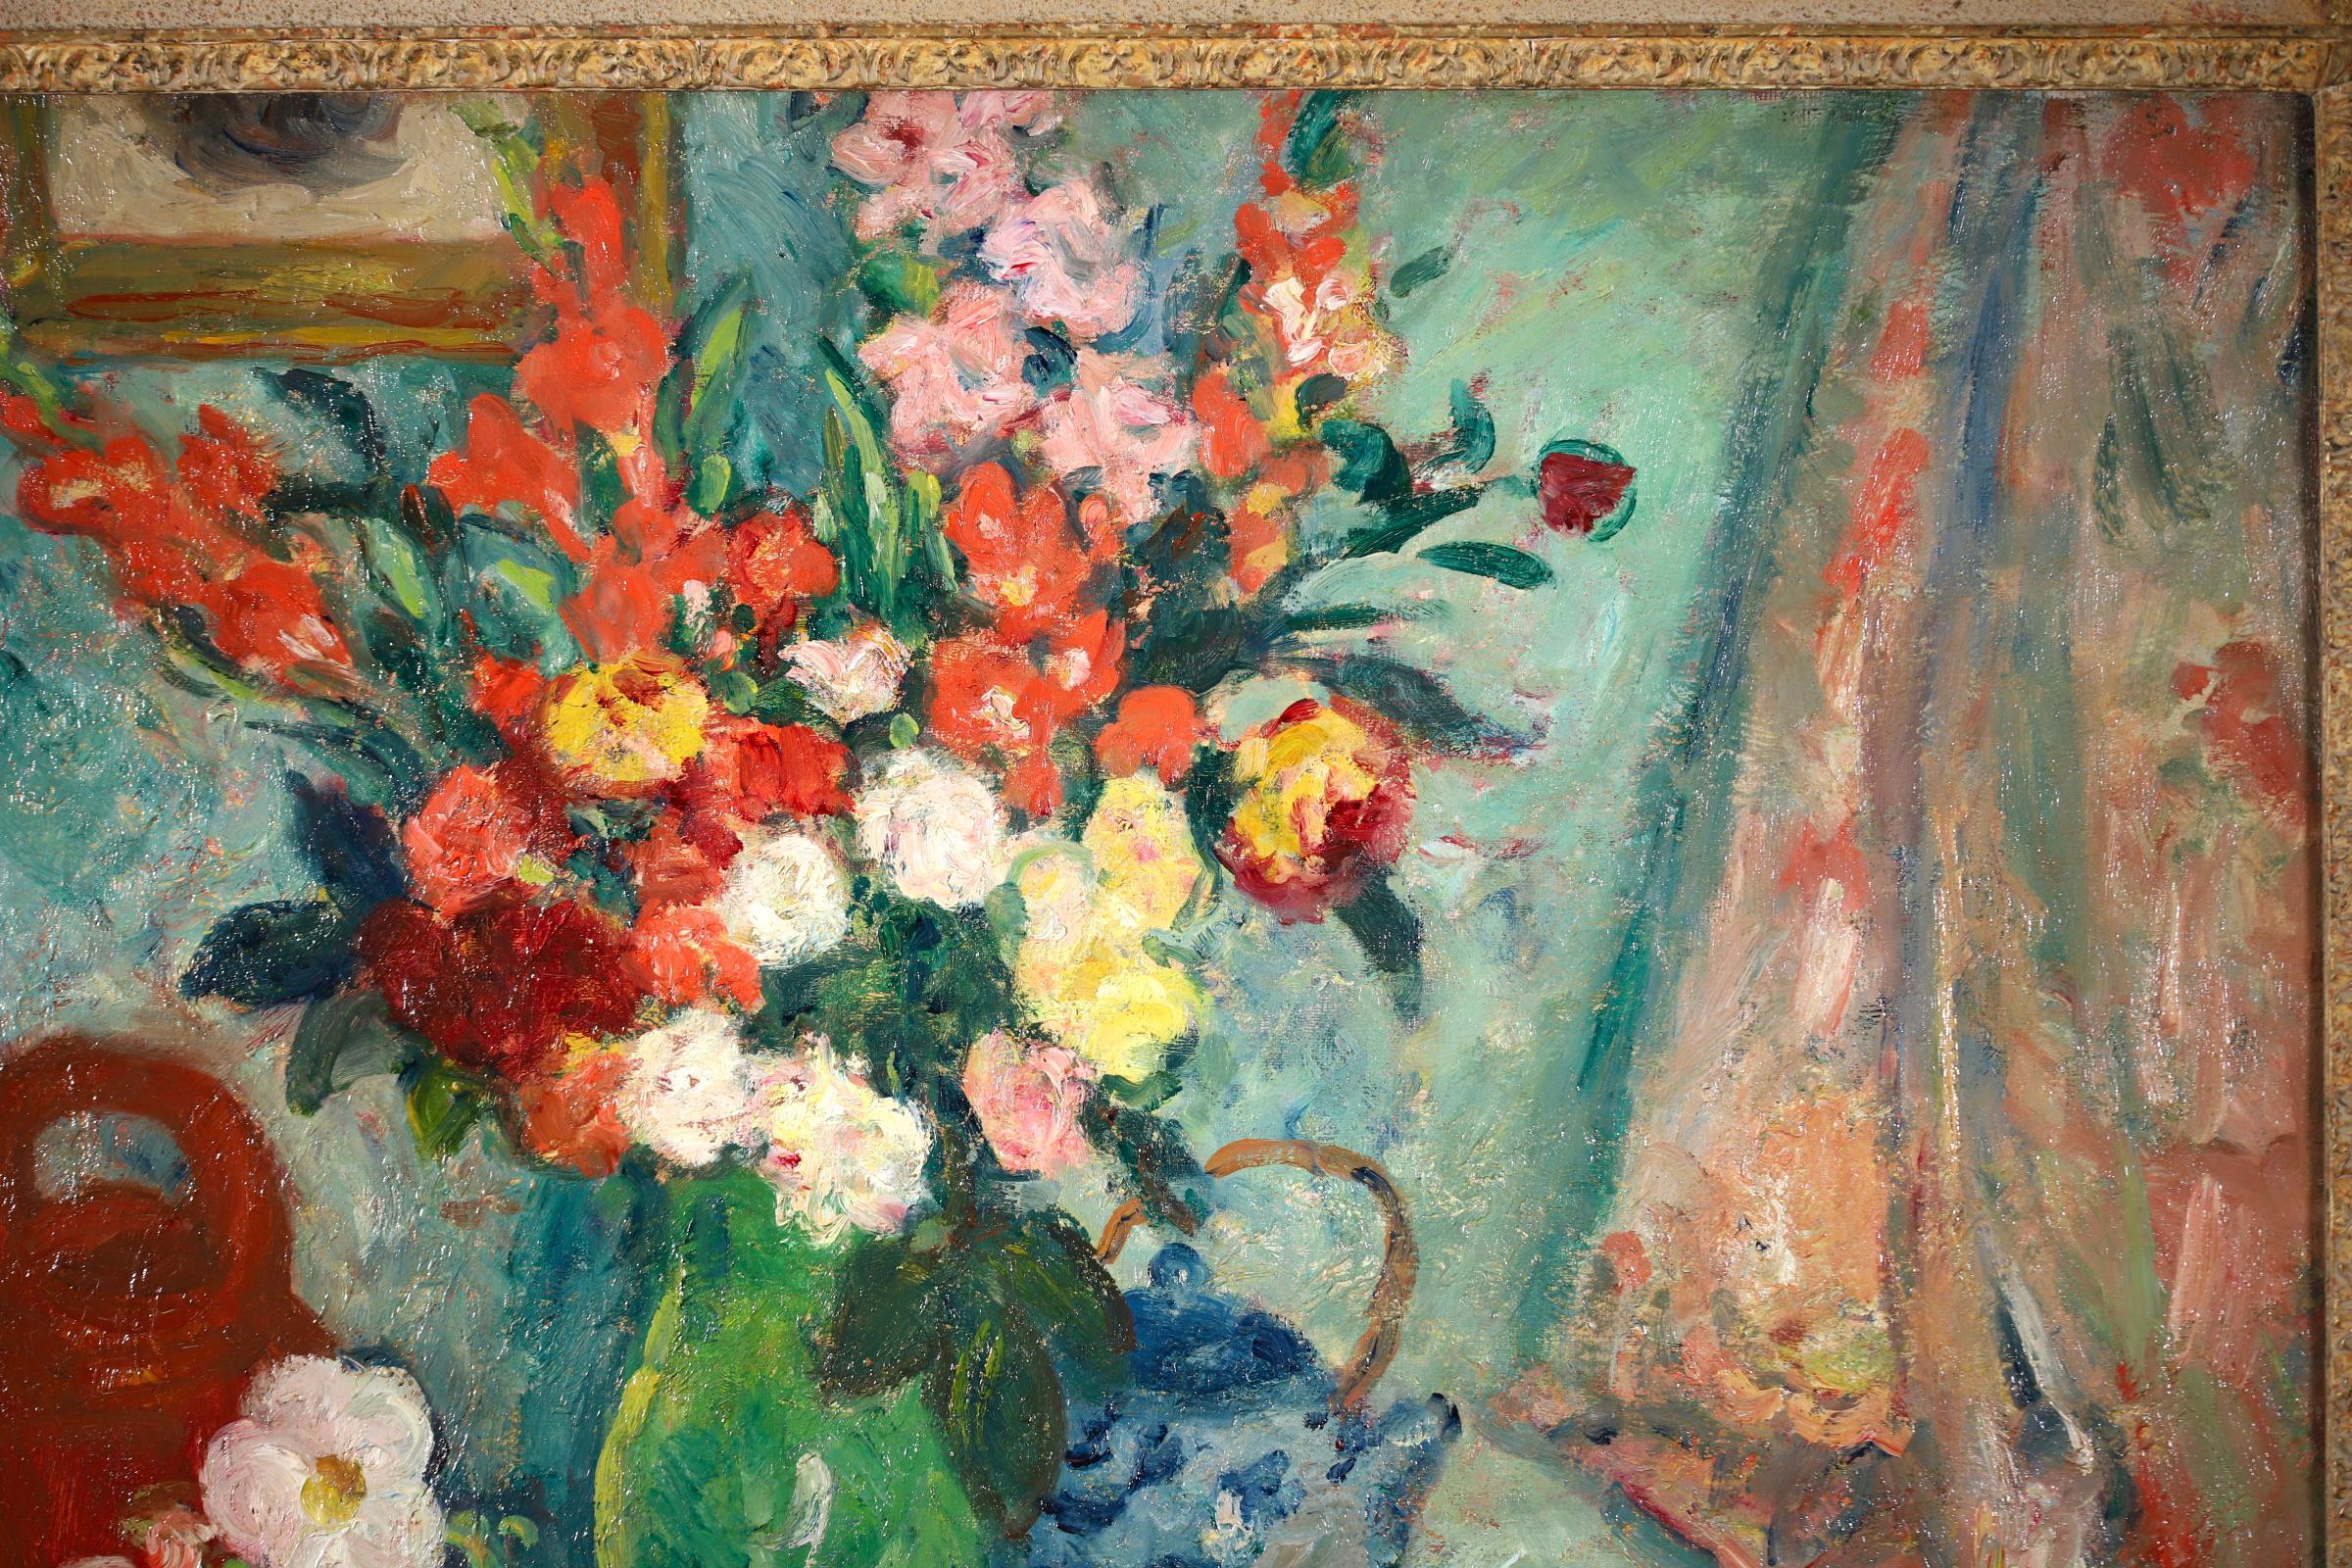 A wonderful still life oil on canvas circa 1920 by French painter Georges d'Espagnat. The piece depicts vases of flowers, a blue and a red teapot and a plate of fruit on a table in a blue interior. Titled 